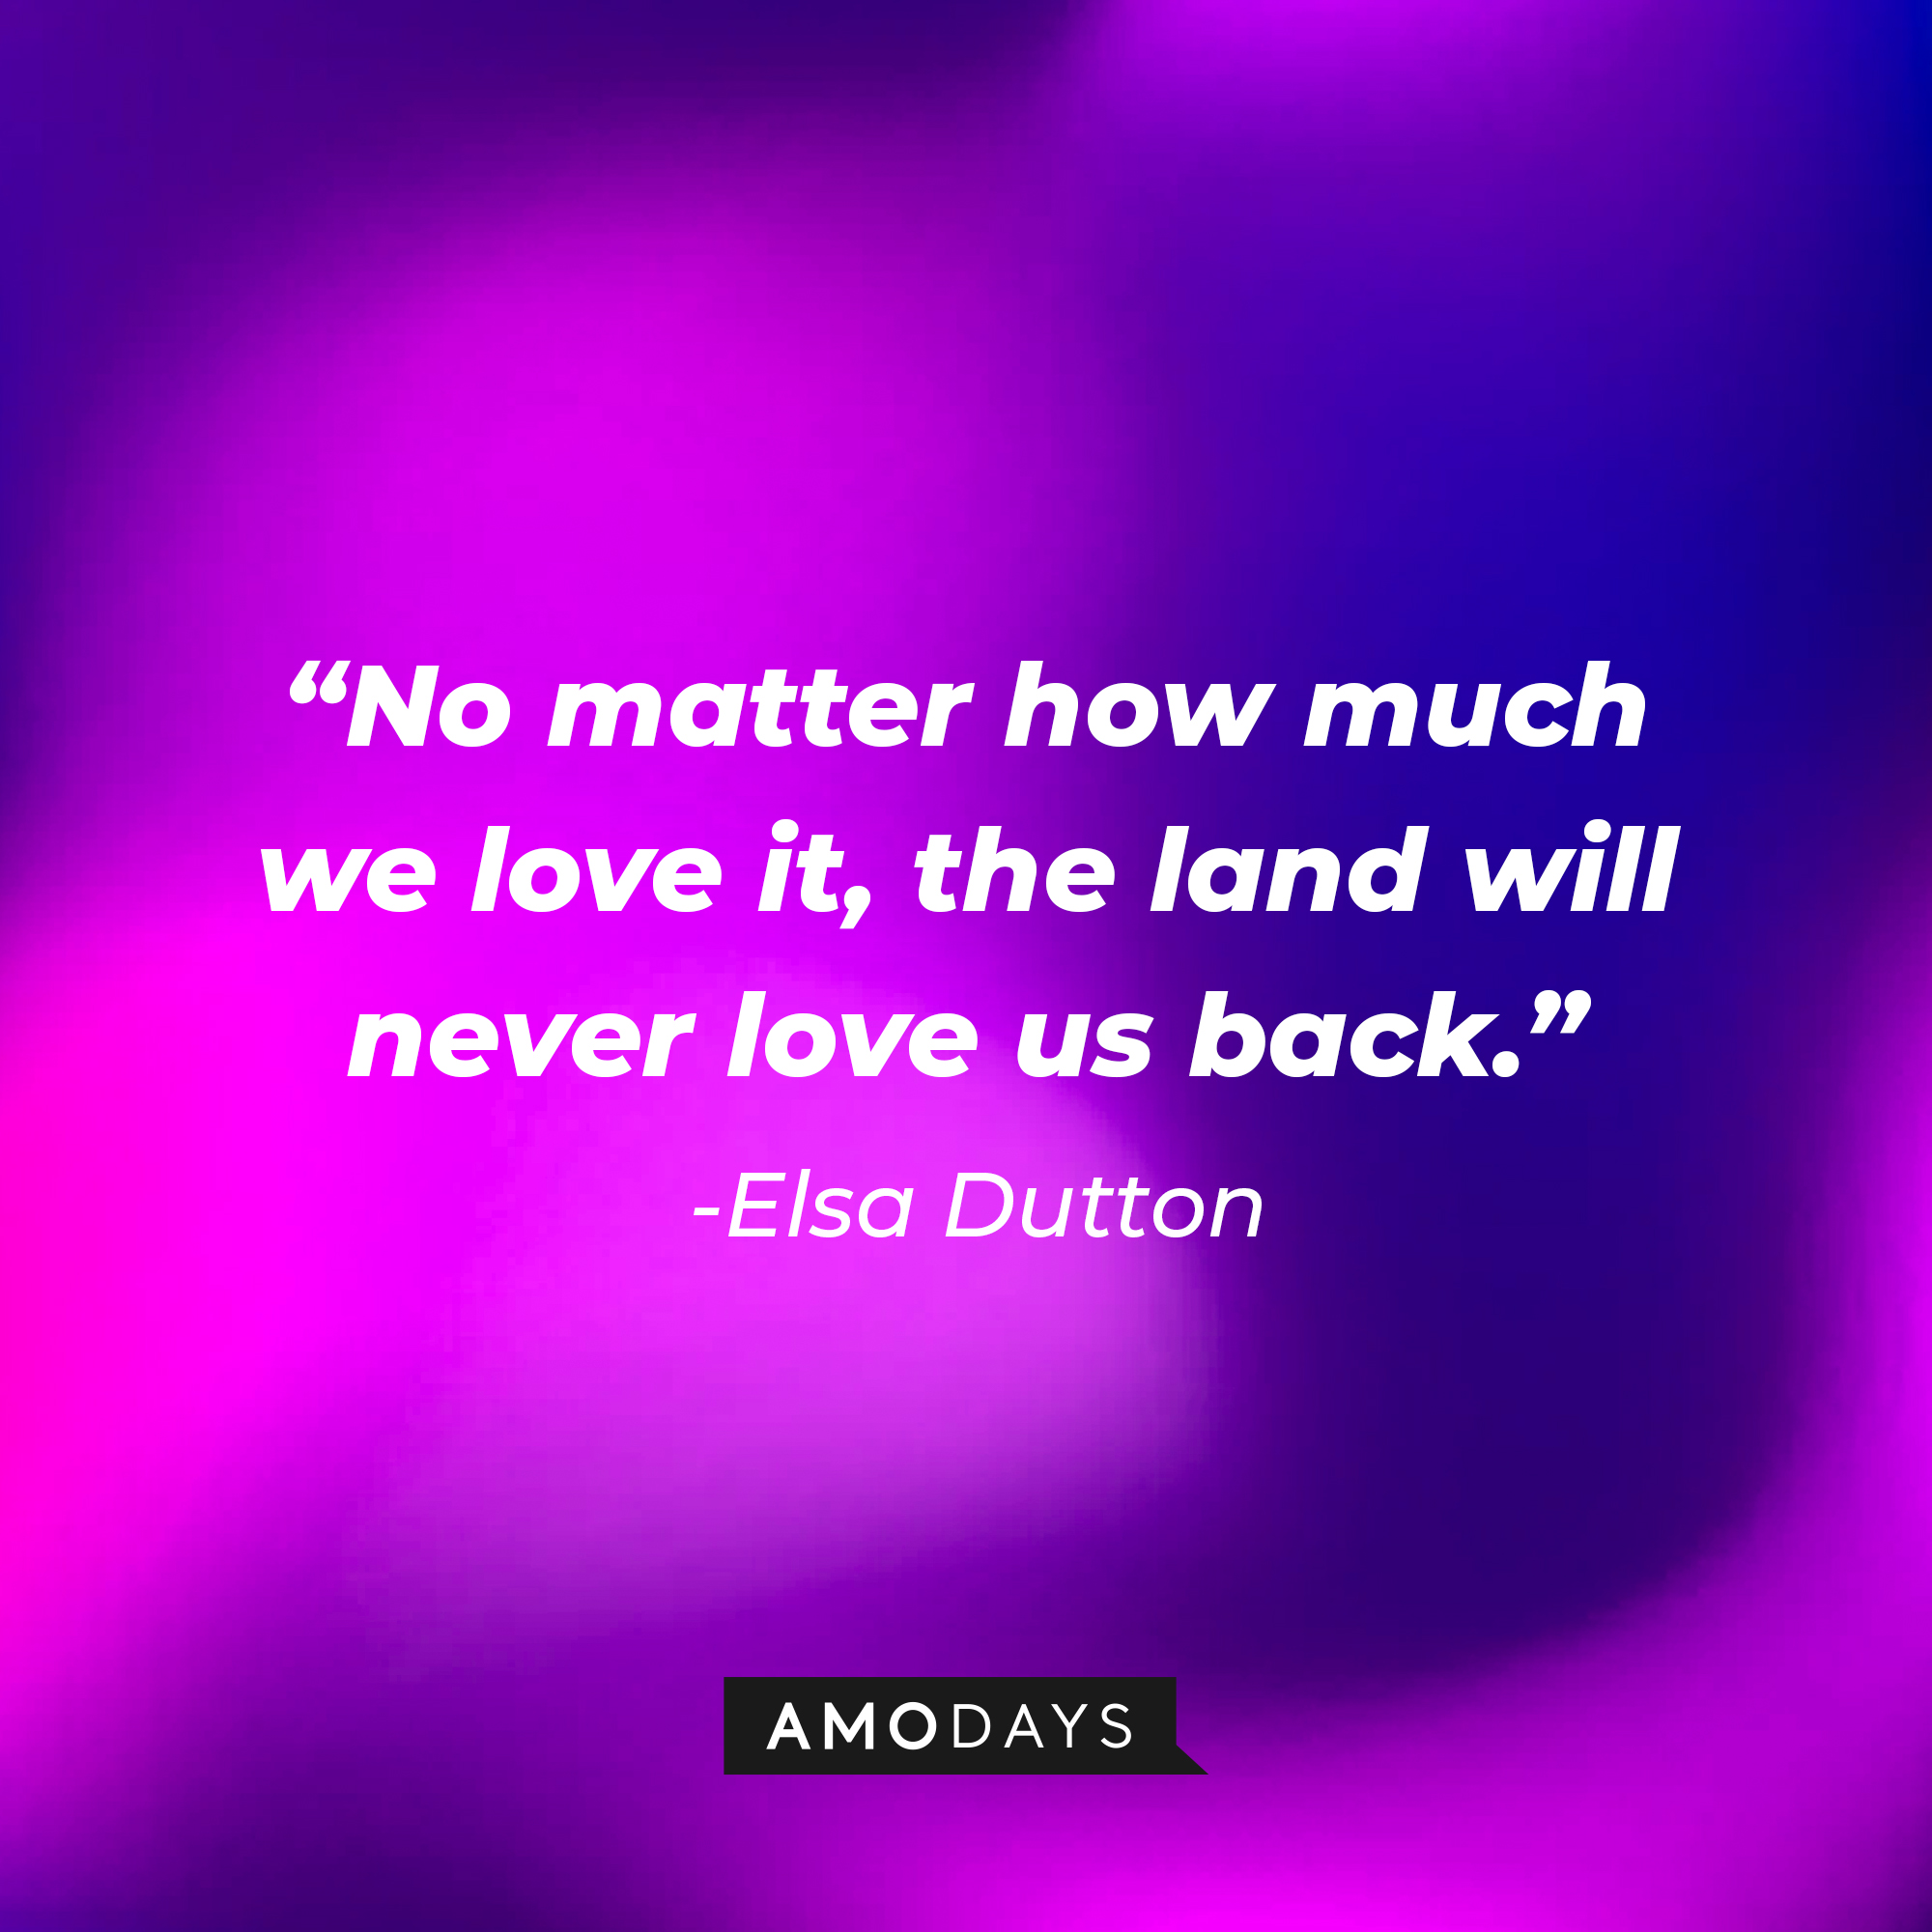 Elsa Dutton's quote: "No matter how much we love it, the land will never love us back." | Source: AmoDays